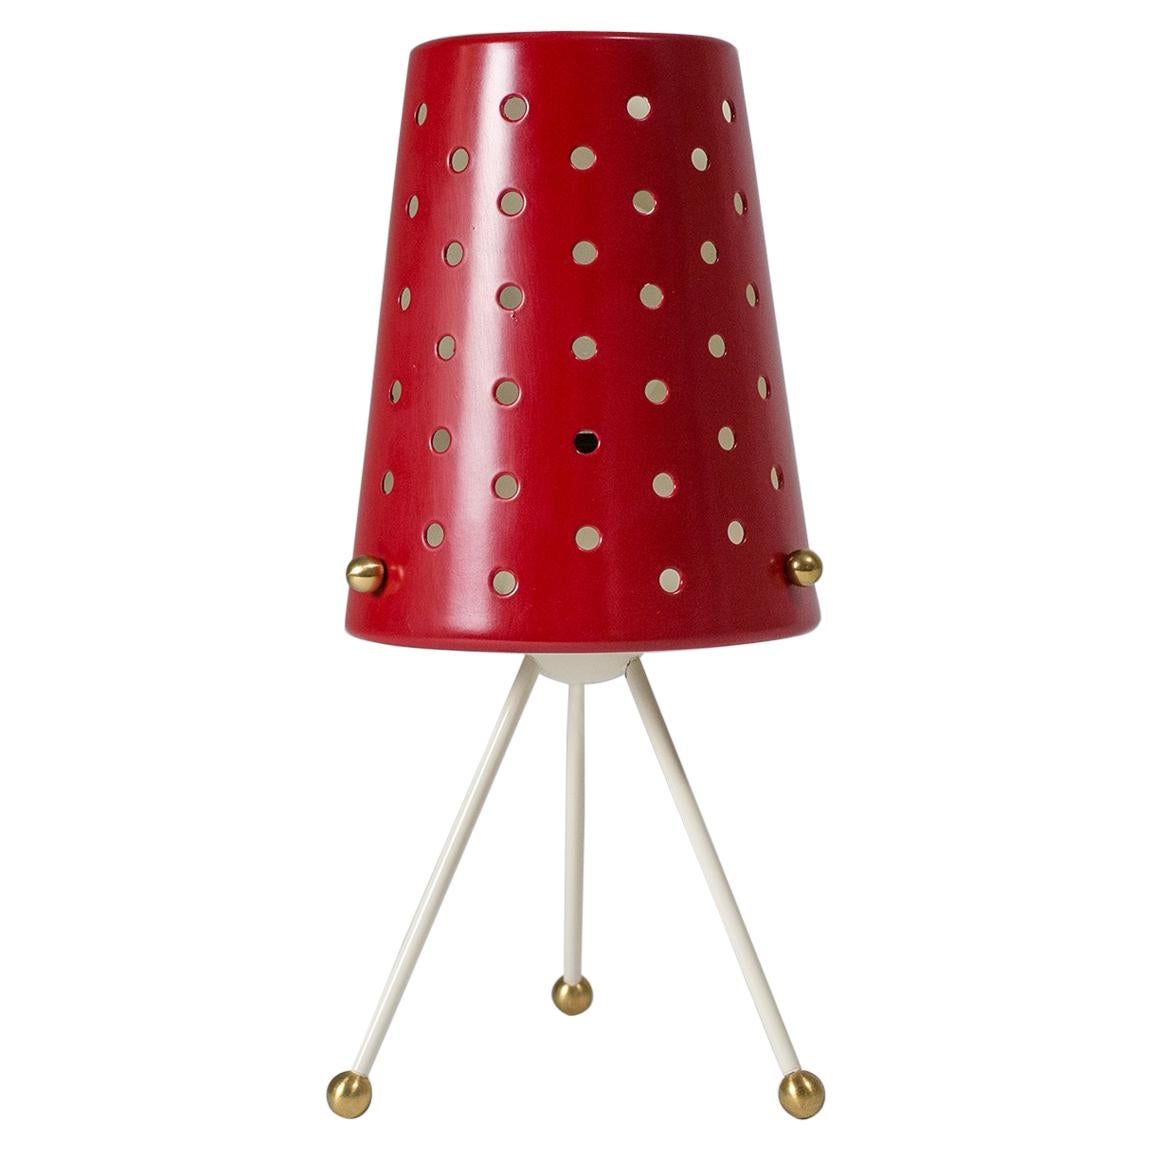 Table Lamp with Pierced Red Shade and Brass Details, 1950s